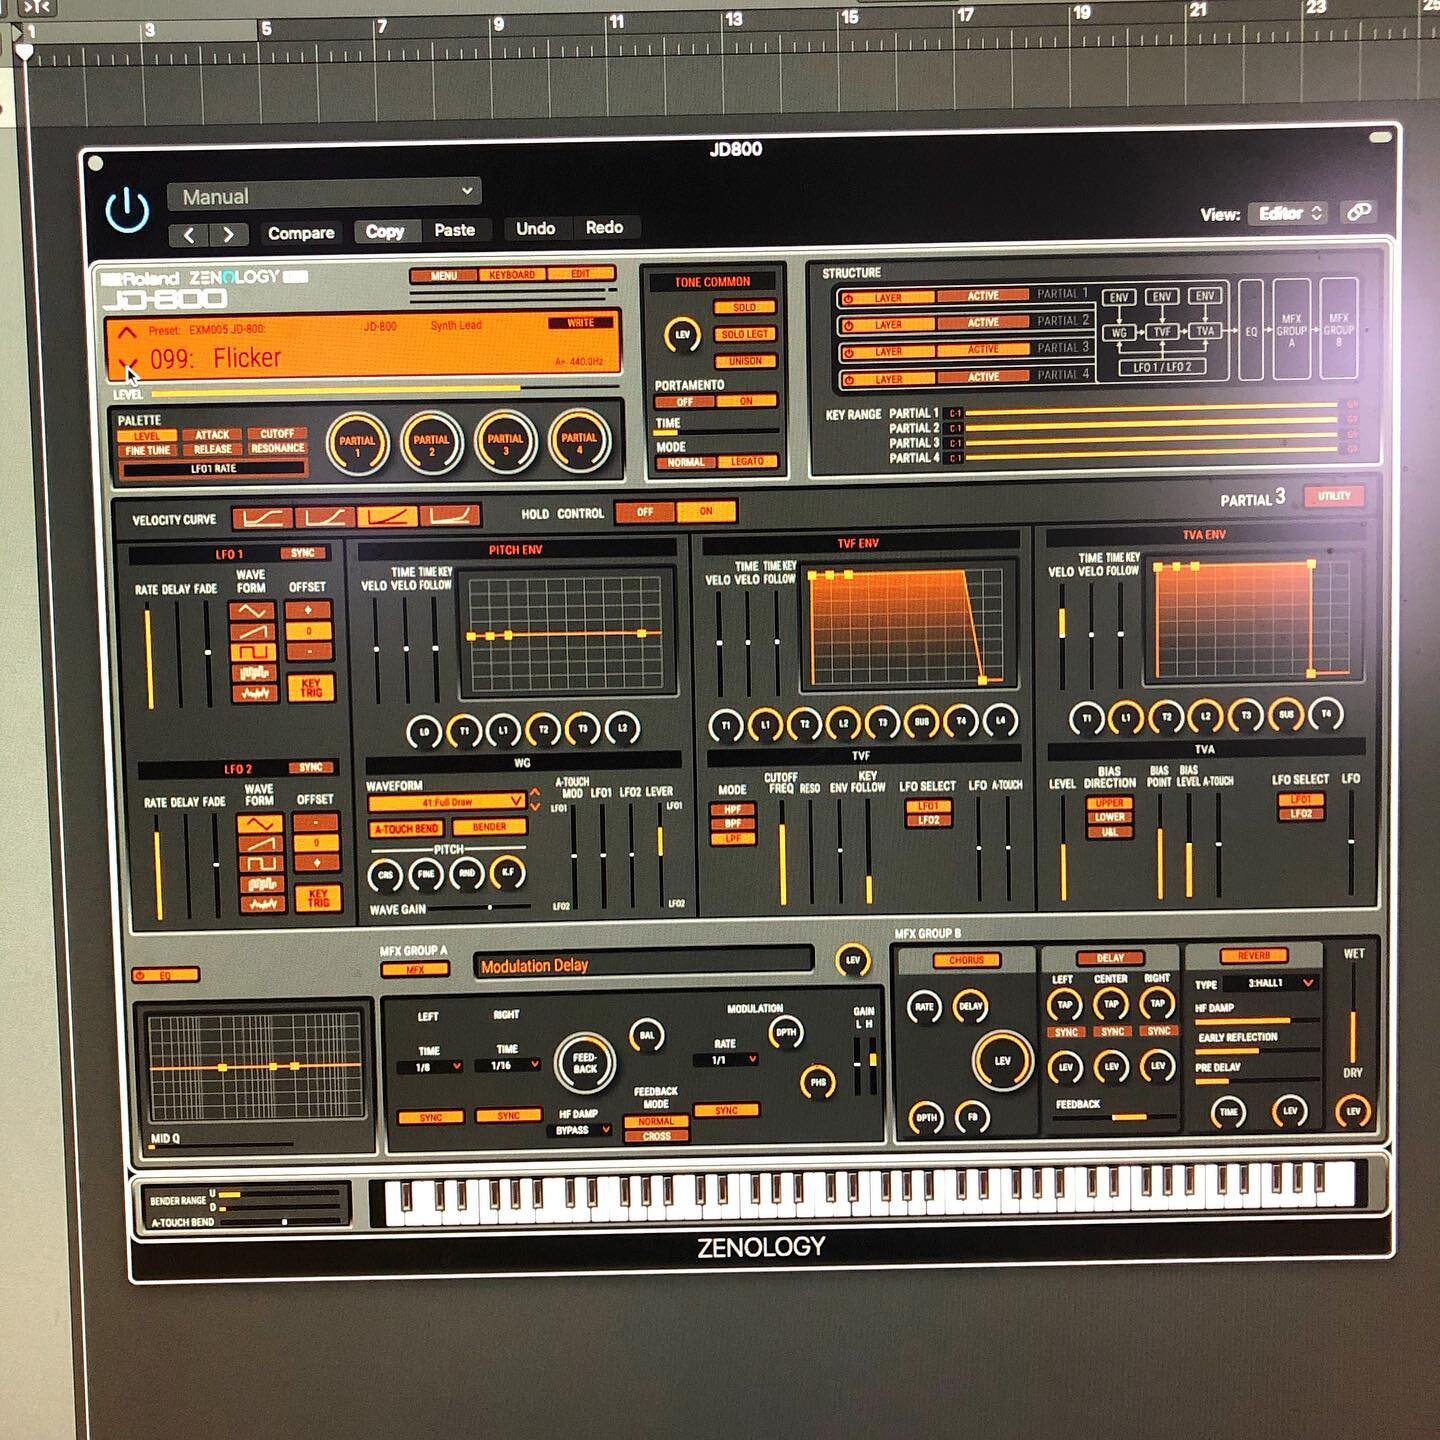 The Roland JD800, my favorite 90s synth, finally arrived in plug-in form. Not kicking myself so hard anymore for selling my real JD800. Now, where&rsquo;s the data card slot for all of my original sounds?? #JD800 #rolandcloud #synths #90ssynth